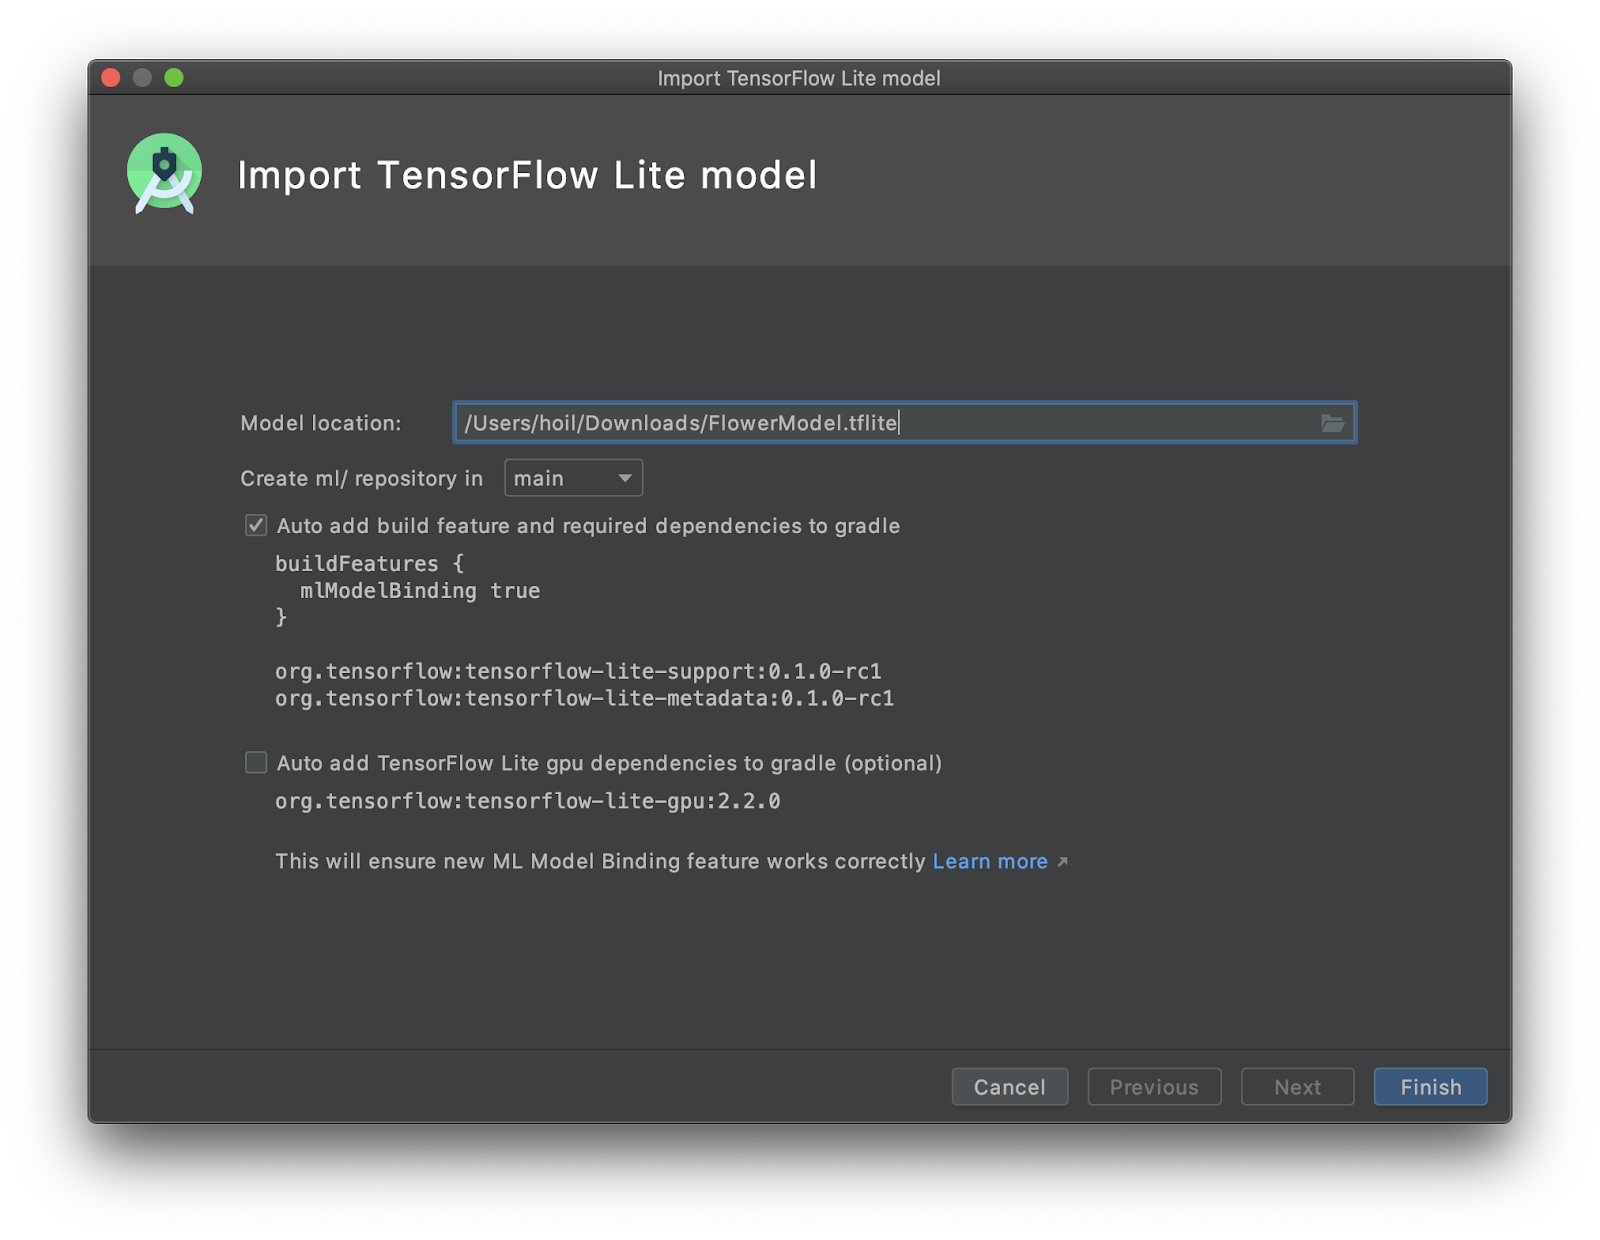 android studio update gradle automatically